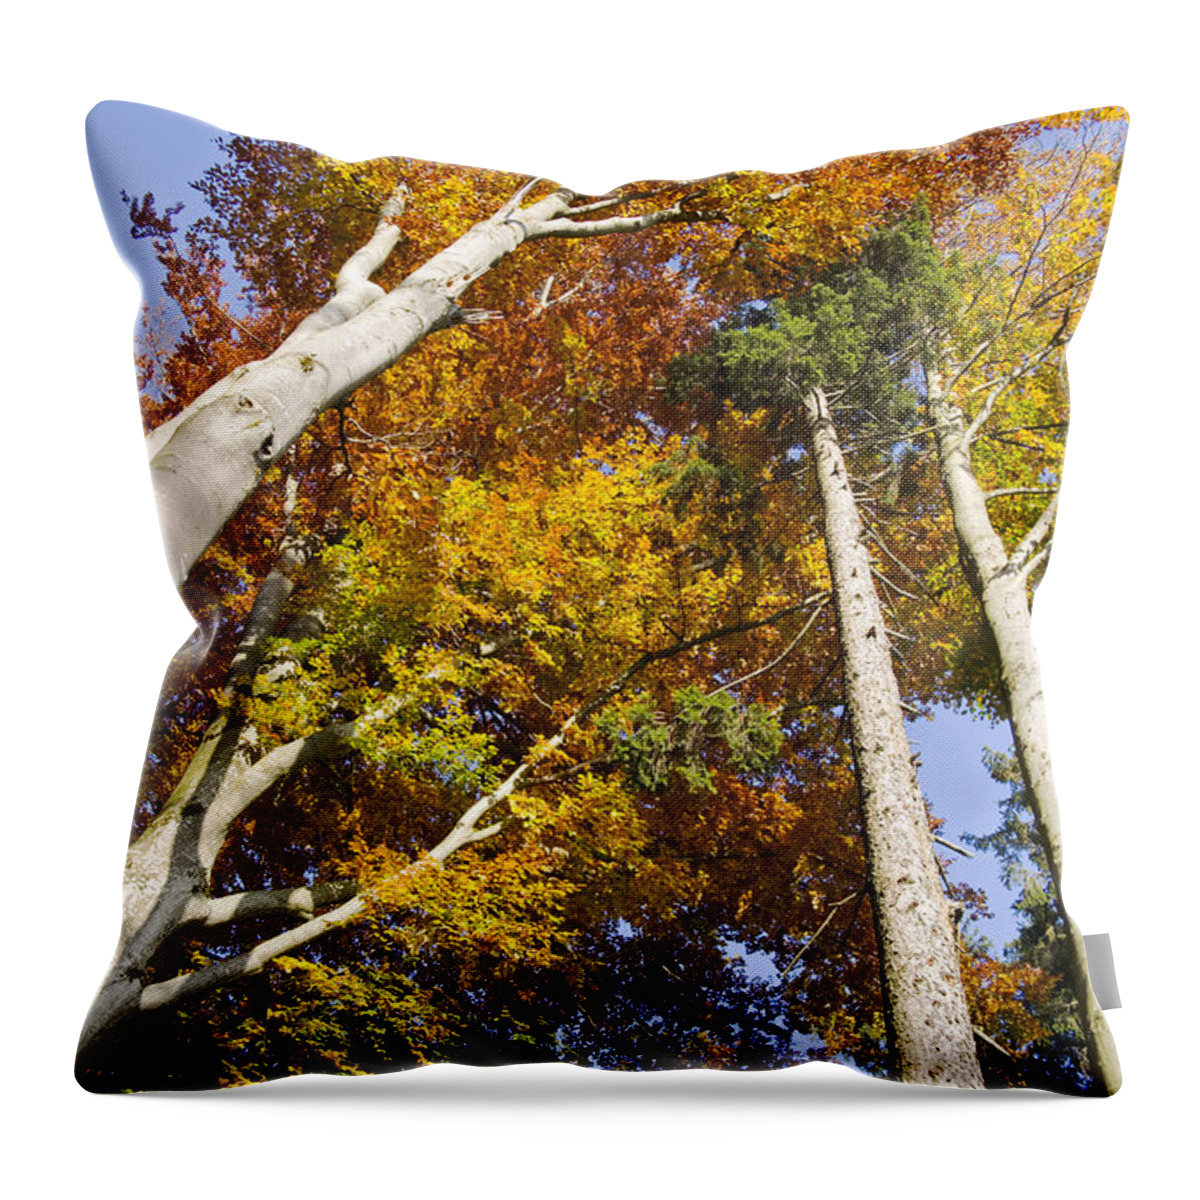 00198119 Throw Pillow featuring the photograph Forest In Autumn Bavaria by Konrad Wothe